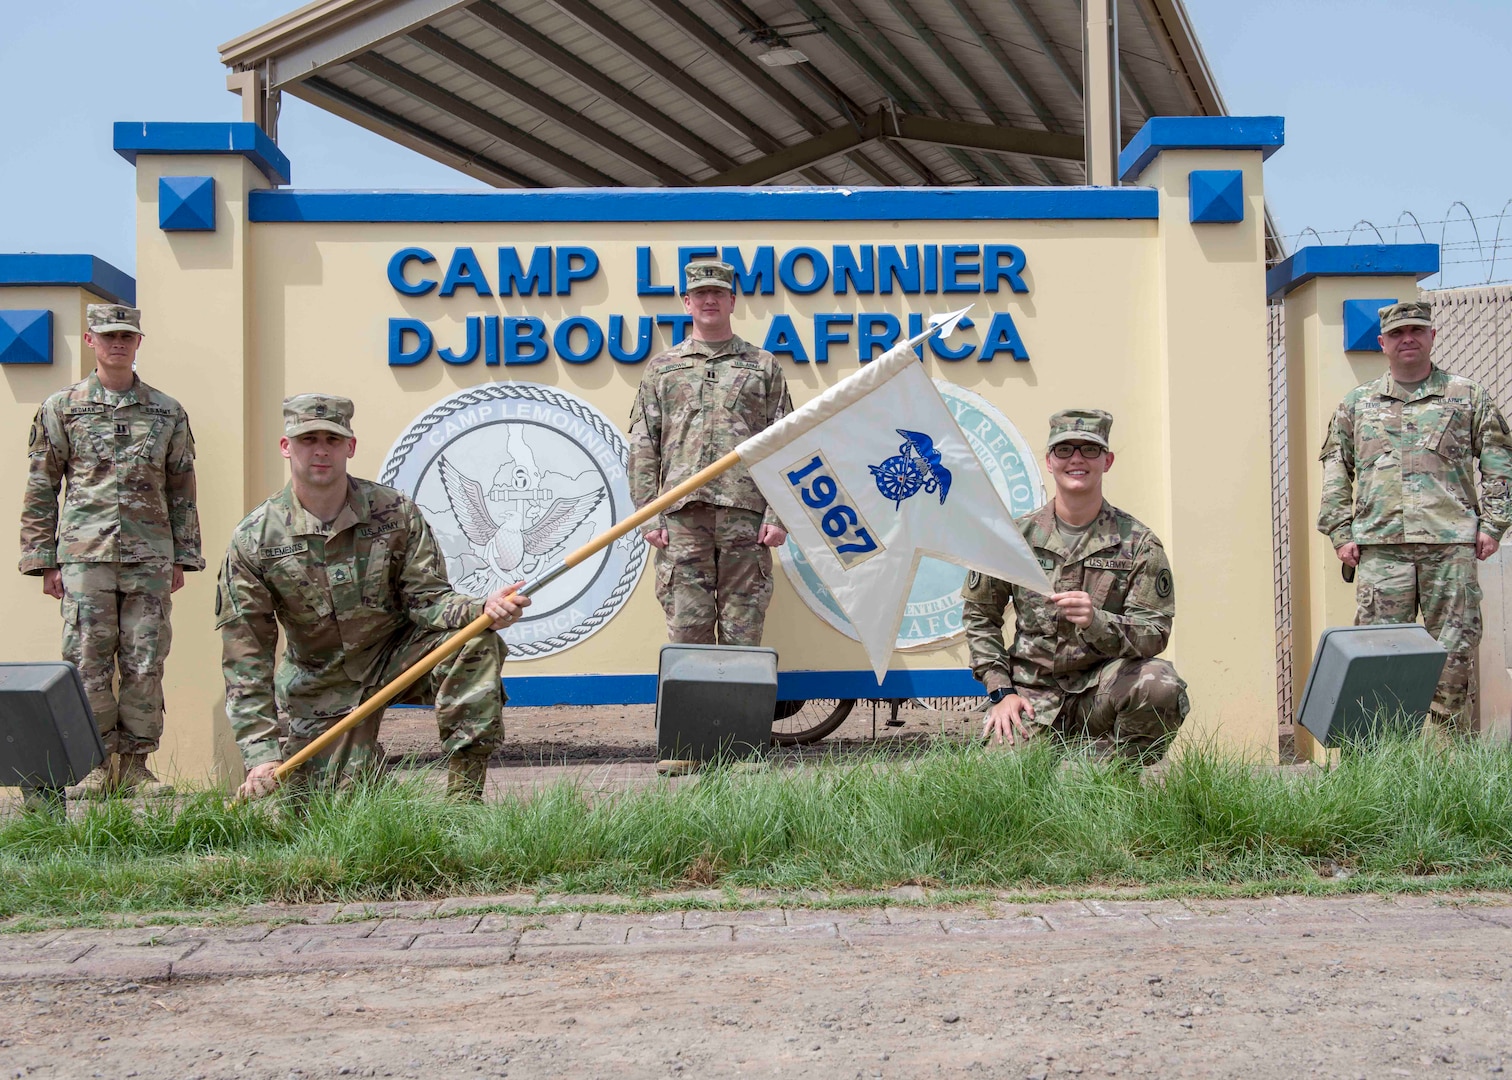 Members of the Wisconsin National Guard’s 1967th Contingency Contracting Team are serving at Combined Joint Task Force Horn of Africa, providing contracting support to U.S. forces in the region. Pictured, left to right: Capt. James Hedman, Sgt. 1st Class Curtis Clements, Capt. Gary Brown, Sgt. Brookelyn Nelson and Master Sgt. Zachary Tevis.